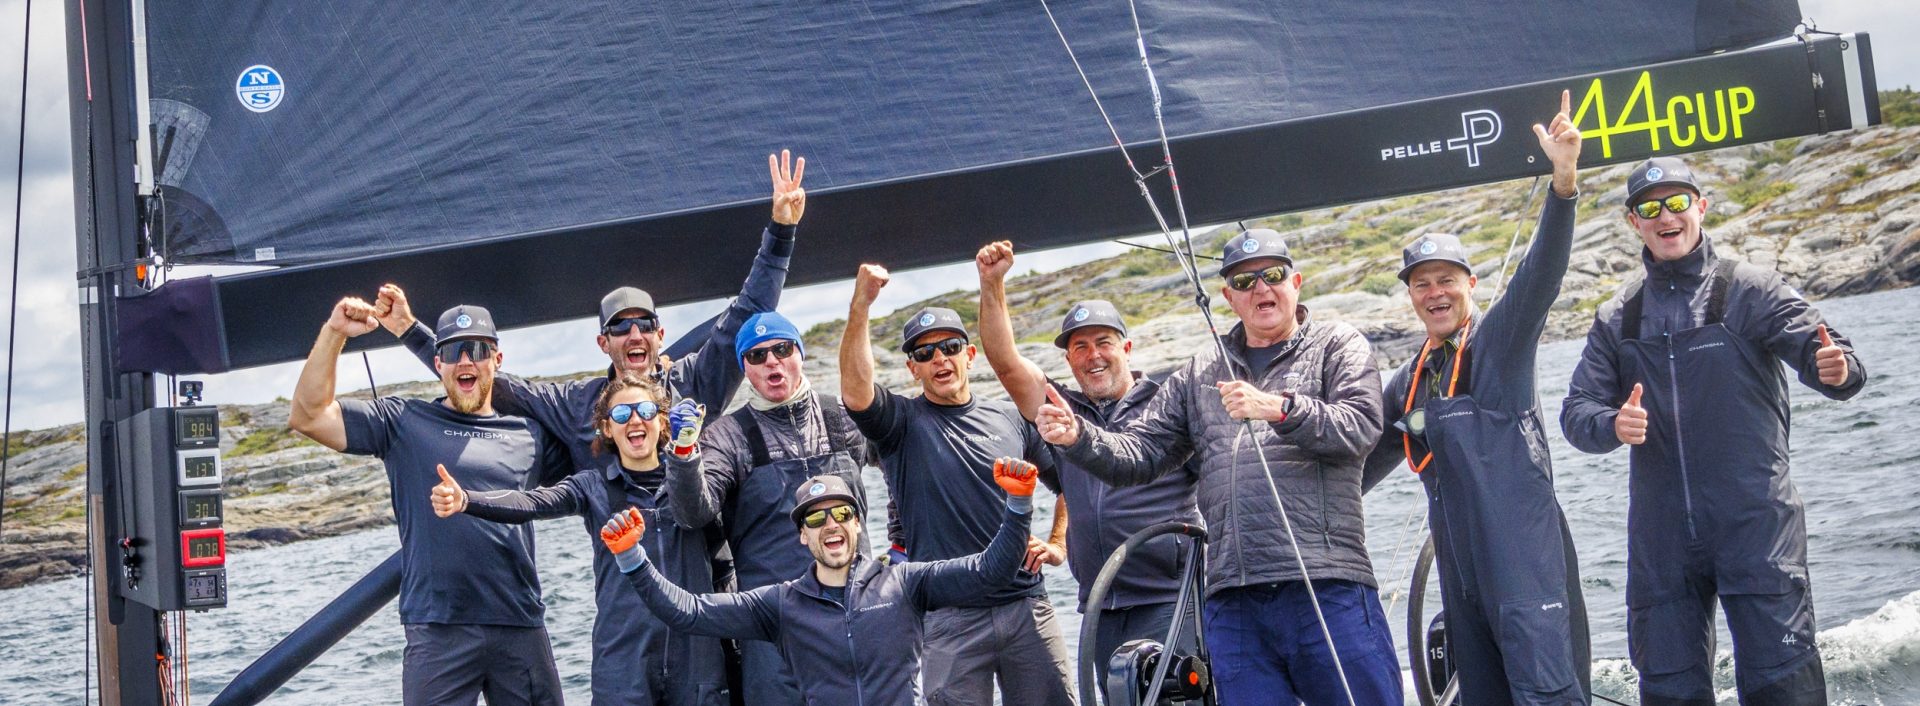 Back on form Charisma claims 44Cup Marstrand with race to spare